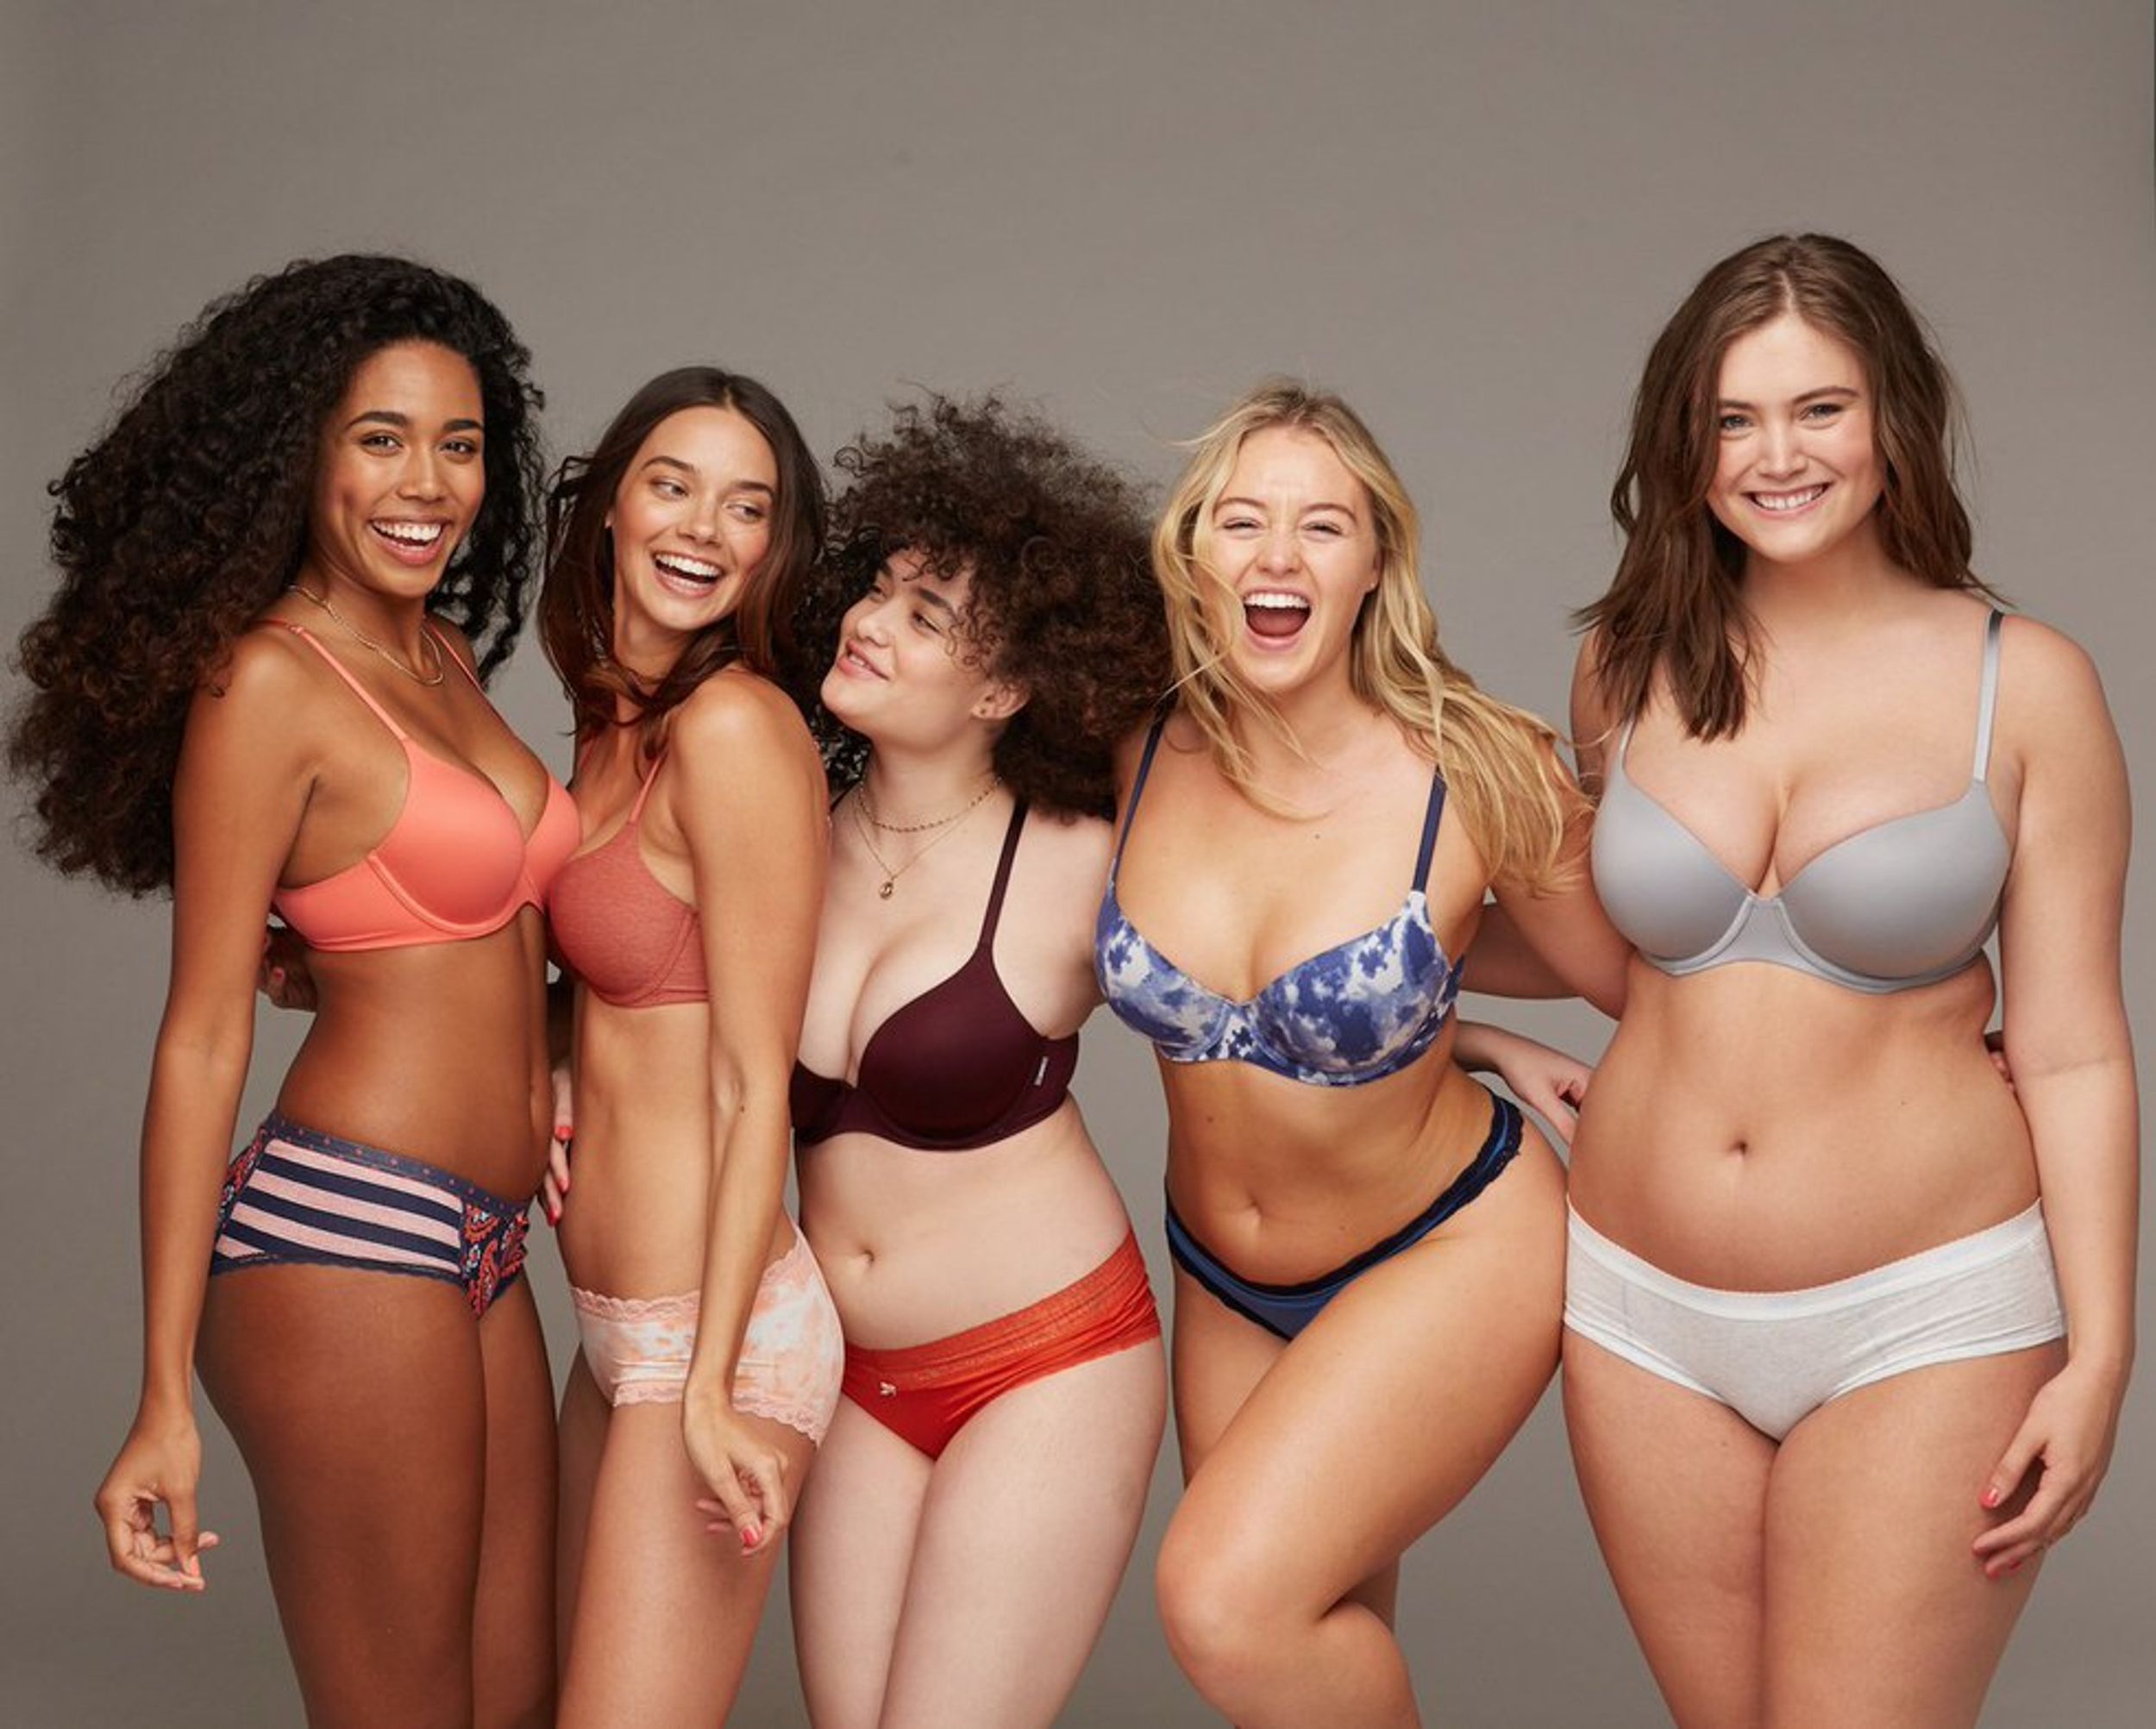 While Victoria's Secret Is Promoting Photoshop, Aerie Is Promoting Body Positivity